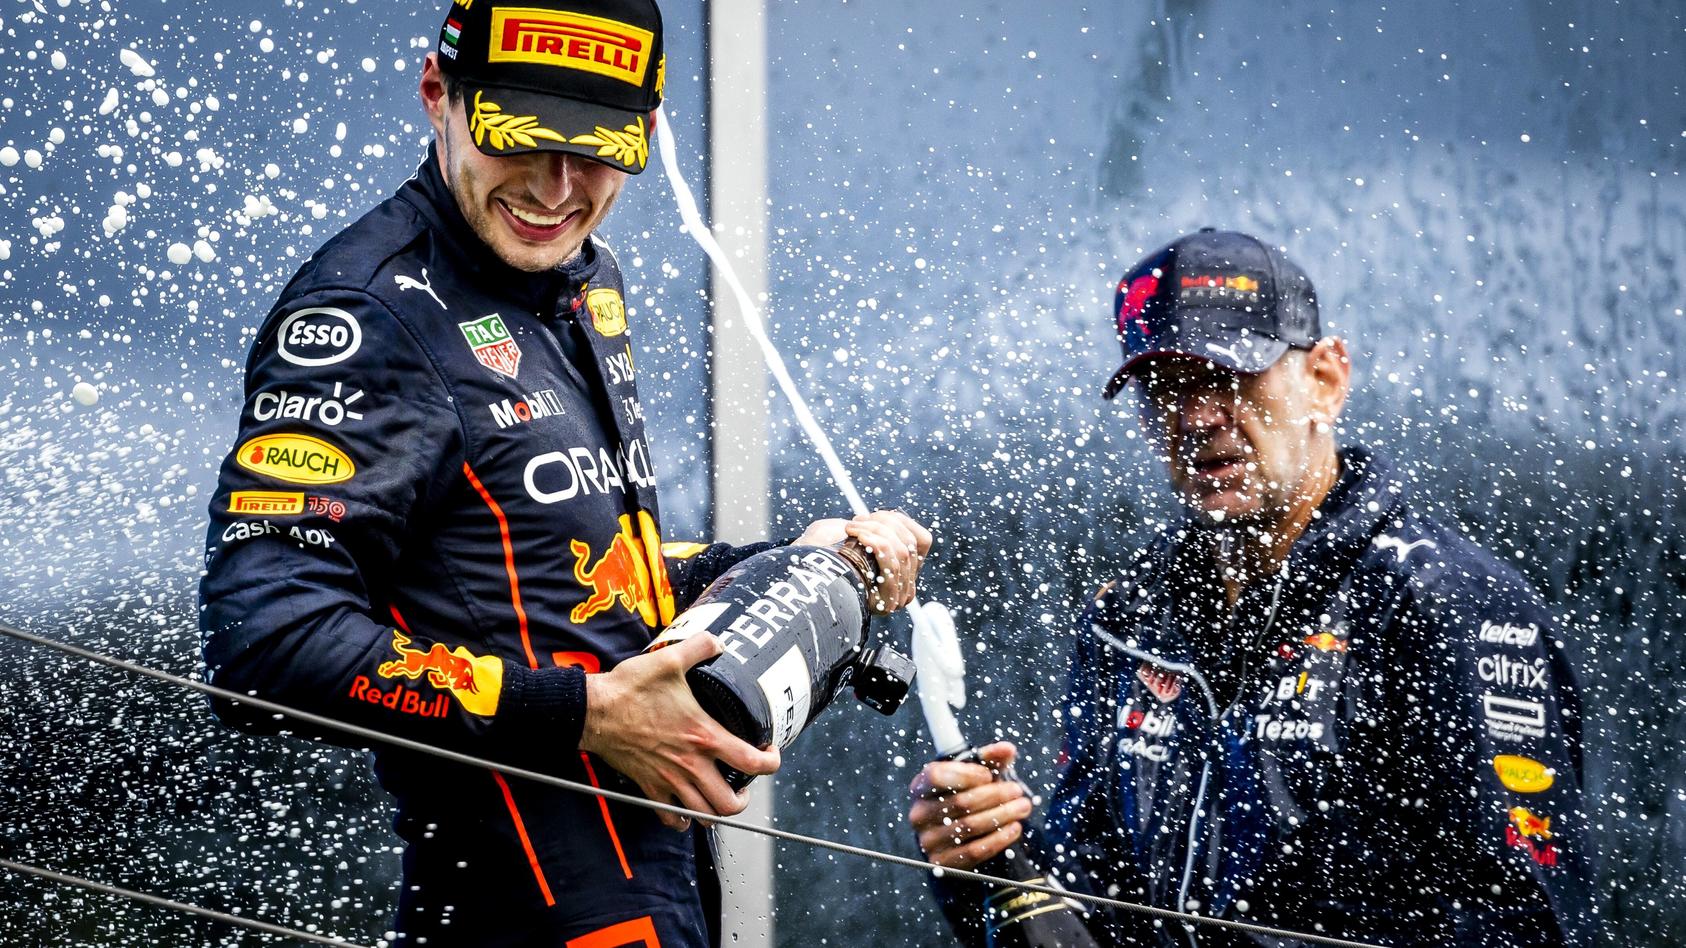 BUDAPEST - Max Verstappen Oracle Red Bull Racing wins the Hungarian Grand Prix at the Hungaroring Circuit on July 31, 2022 in Budapest, Hungary. REMKO DE WAAL Match 2022 xVIxANPxSportx/xxANPxIVx *** BUDAPEST Max Verstappen Oracle Red Bull Racing wins